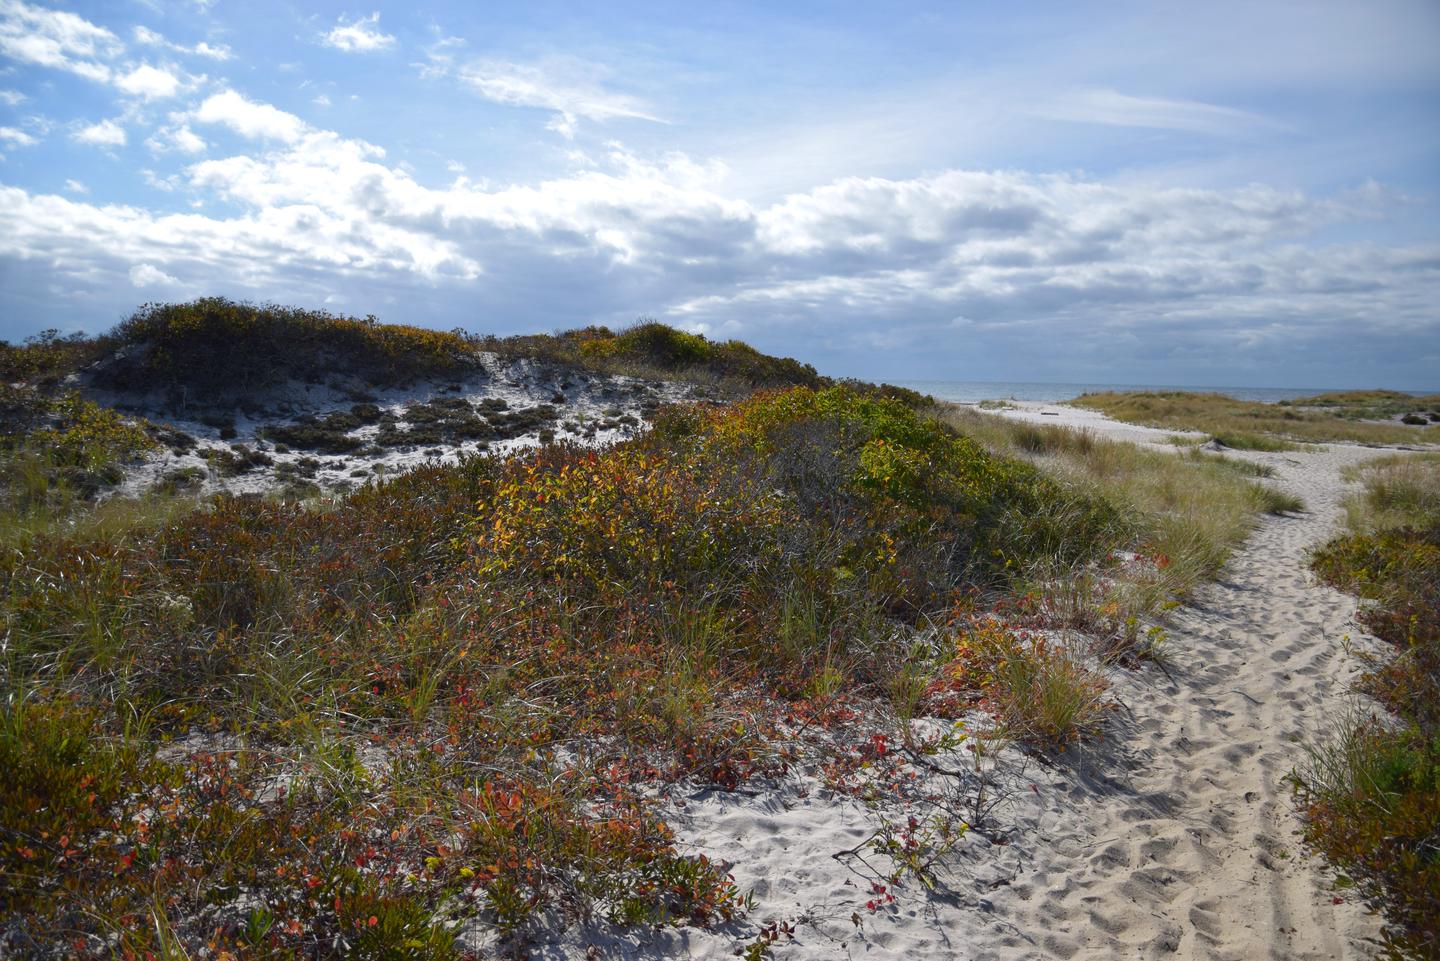 Fire Island WildernessUnparalleled opportunities for solitude and recreation can be found in New York State's only federally designated wilderness, the Otis Pike Fire Island High Dune Wilderness.